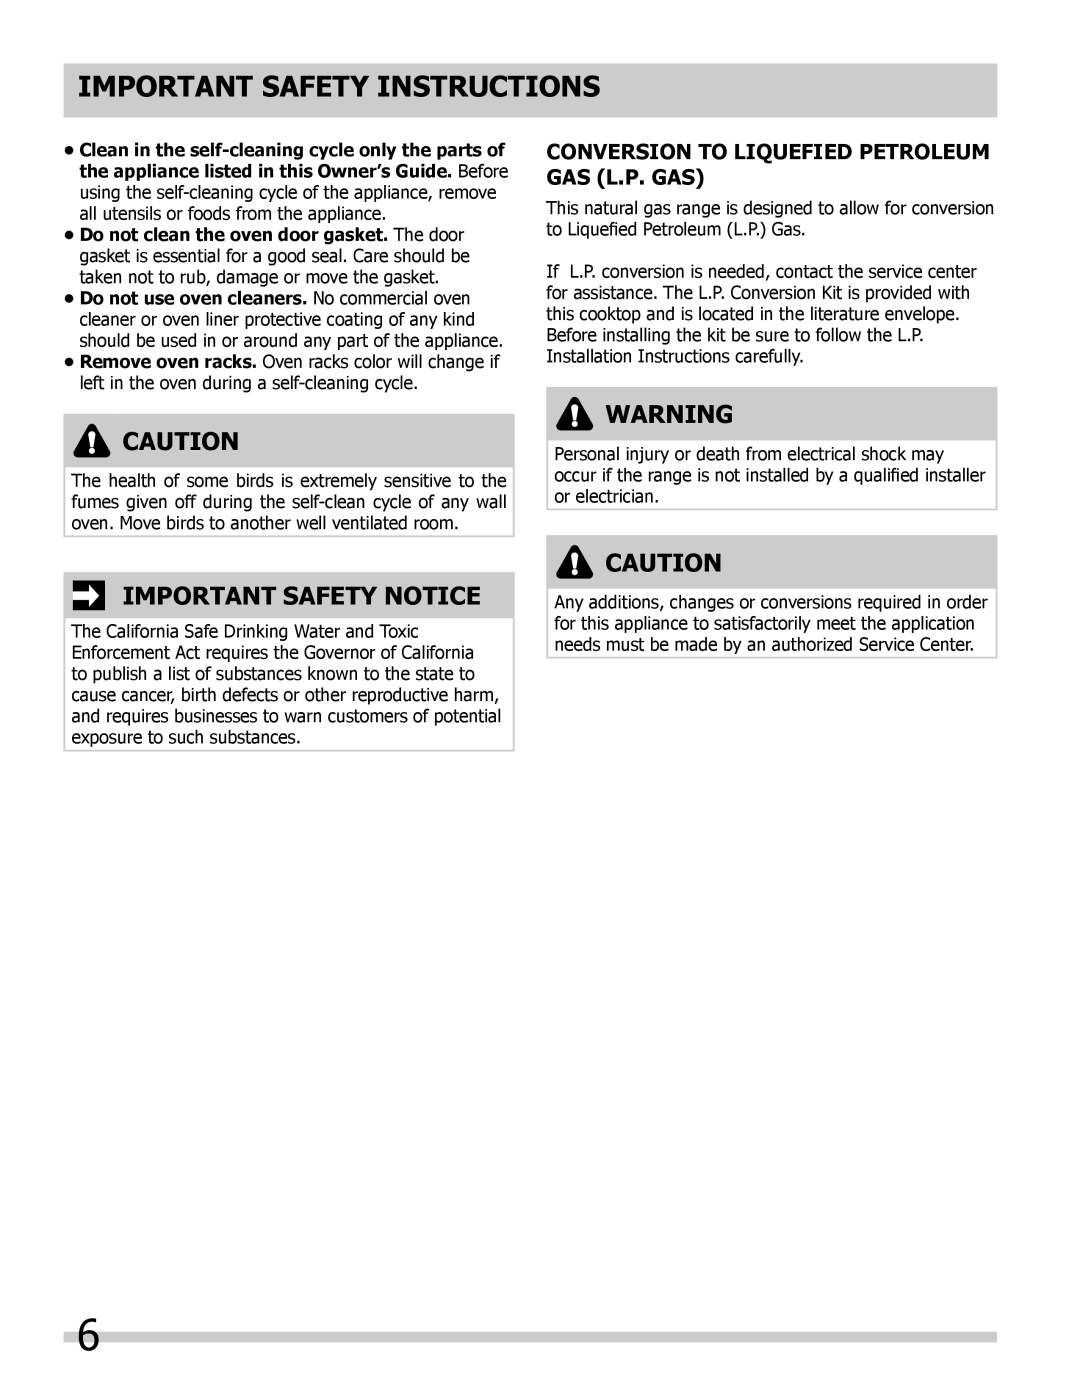 Frigidaire FPDF4085KF important safety instructions Important Safety Notice, Conversion to Liquefied Petroleum Gas L.P. Gas 